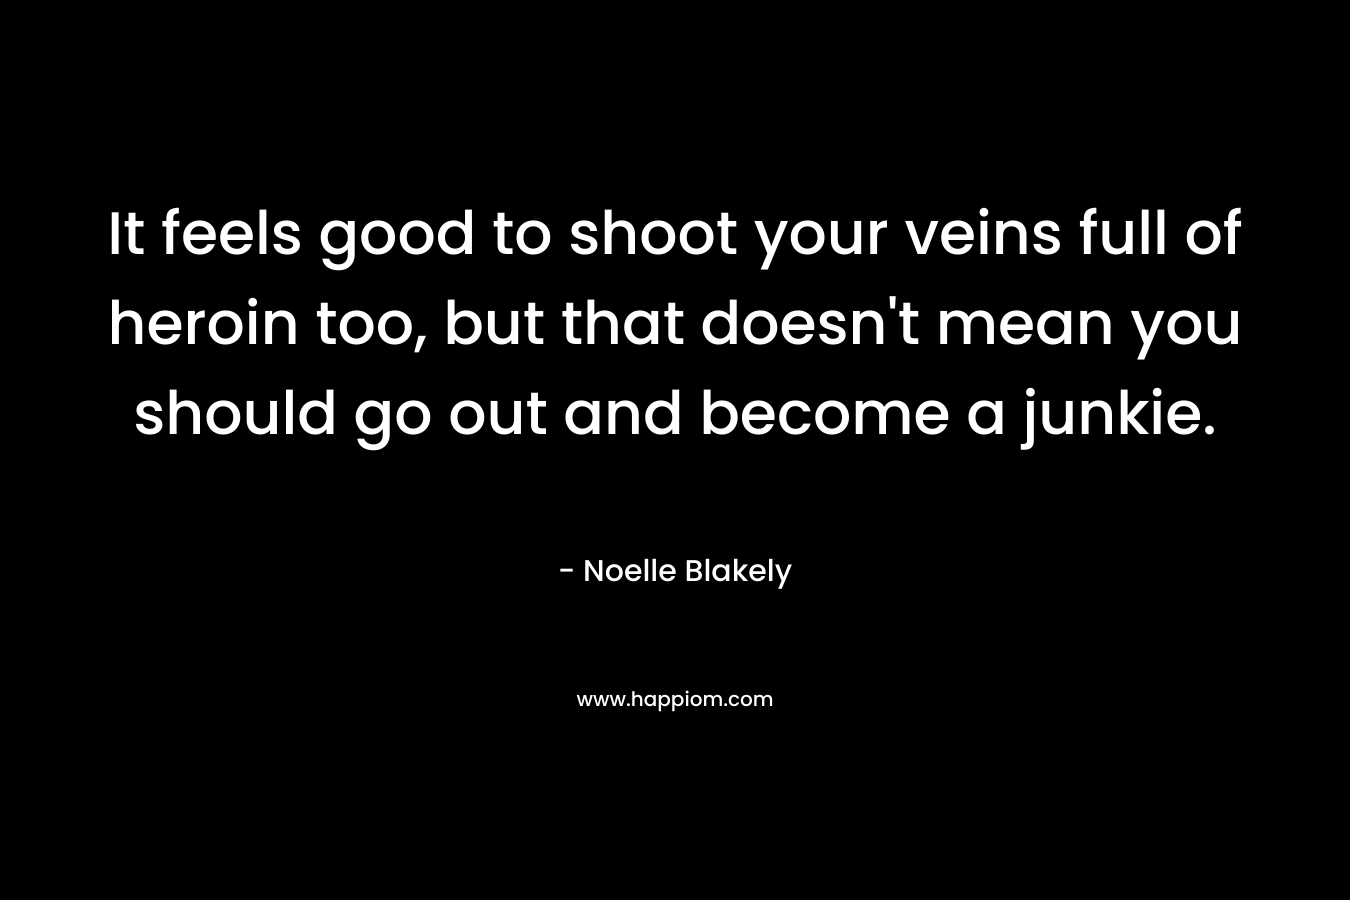 It feels good to shoot your veins full of heroin too, but that doesn’t mean you should go out and become a junkie. – Noelle Blakely